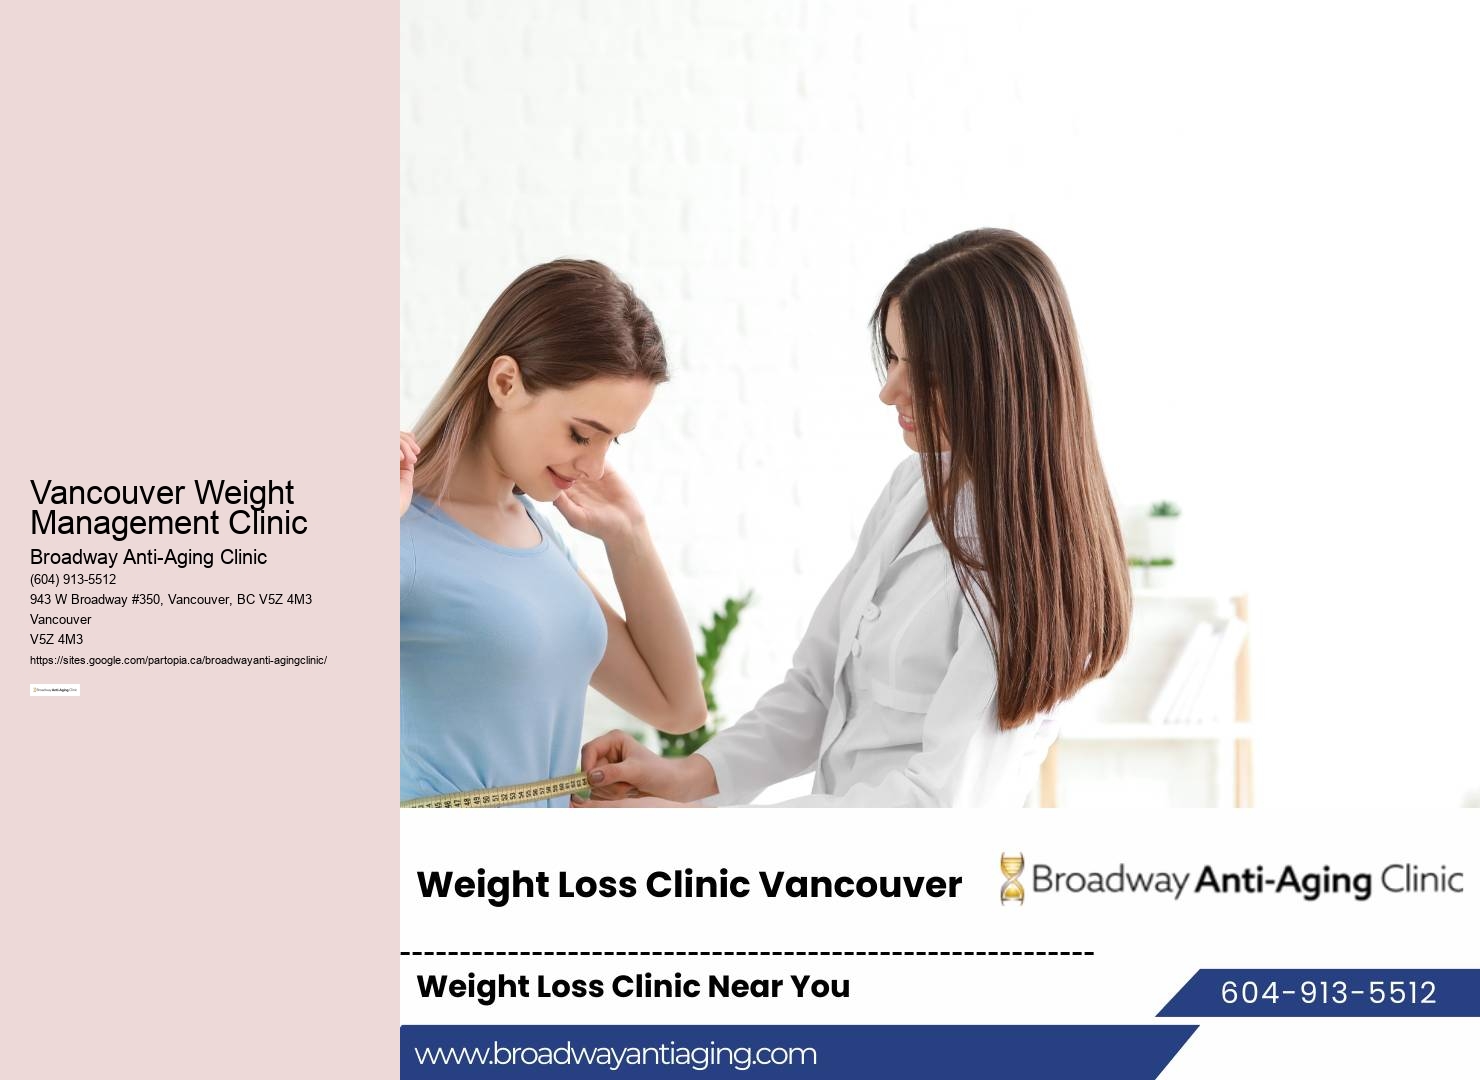 Vancouver Weight Management Clinic